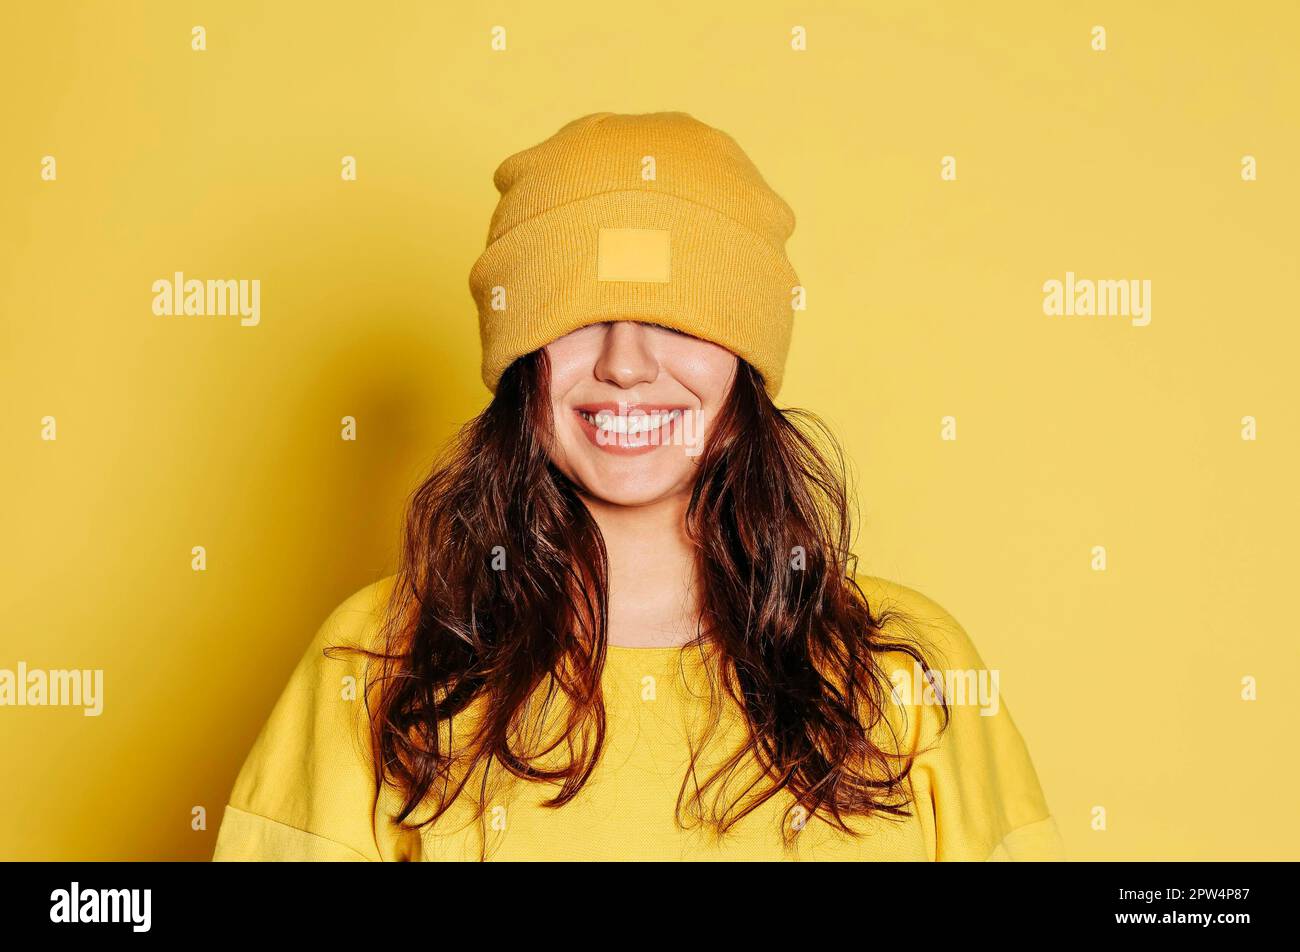 Happy young female in trendy yellow sweatshirt and knitted hat covering eyes smiling brightly against yellow background Stock Photo